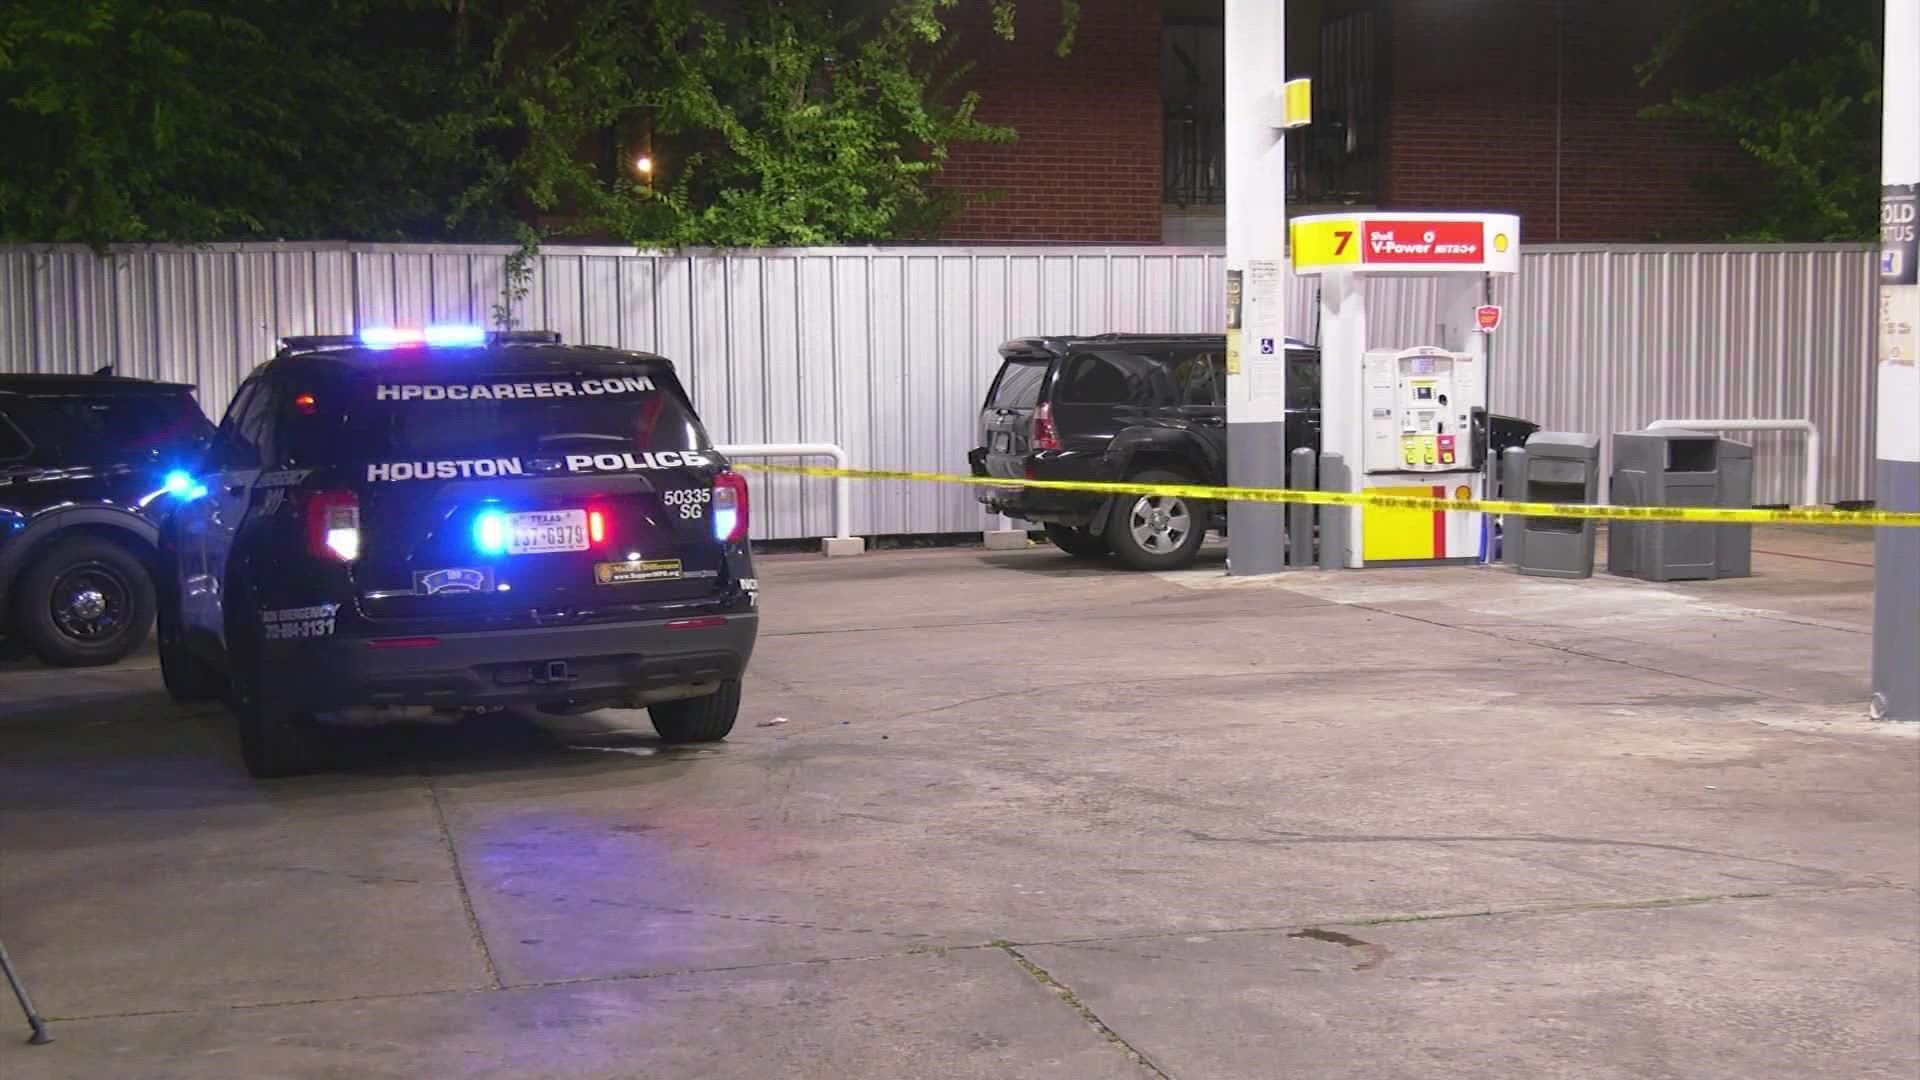 Investigators said the victim was walking back to his vehicle when a suspect opened fire from the backseat of a dark-colored SUV that was parked at another pump.